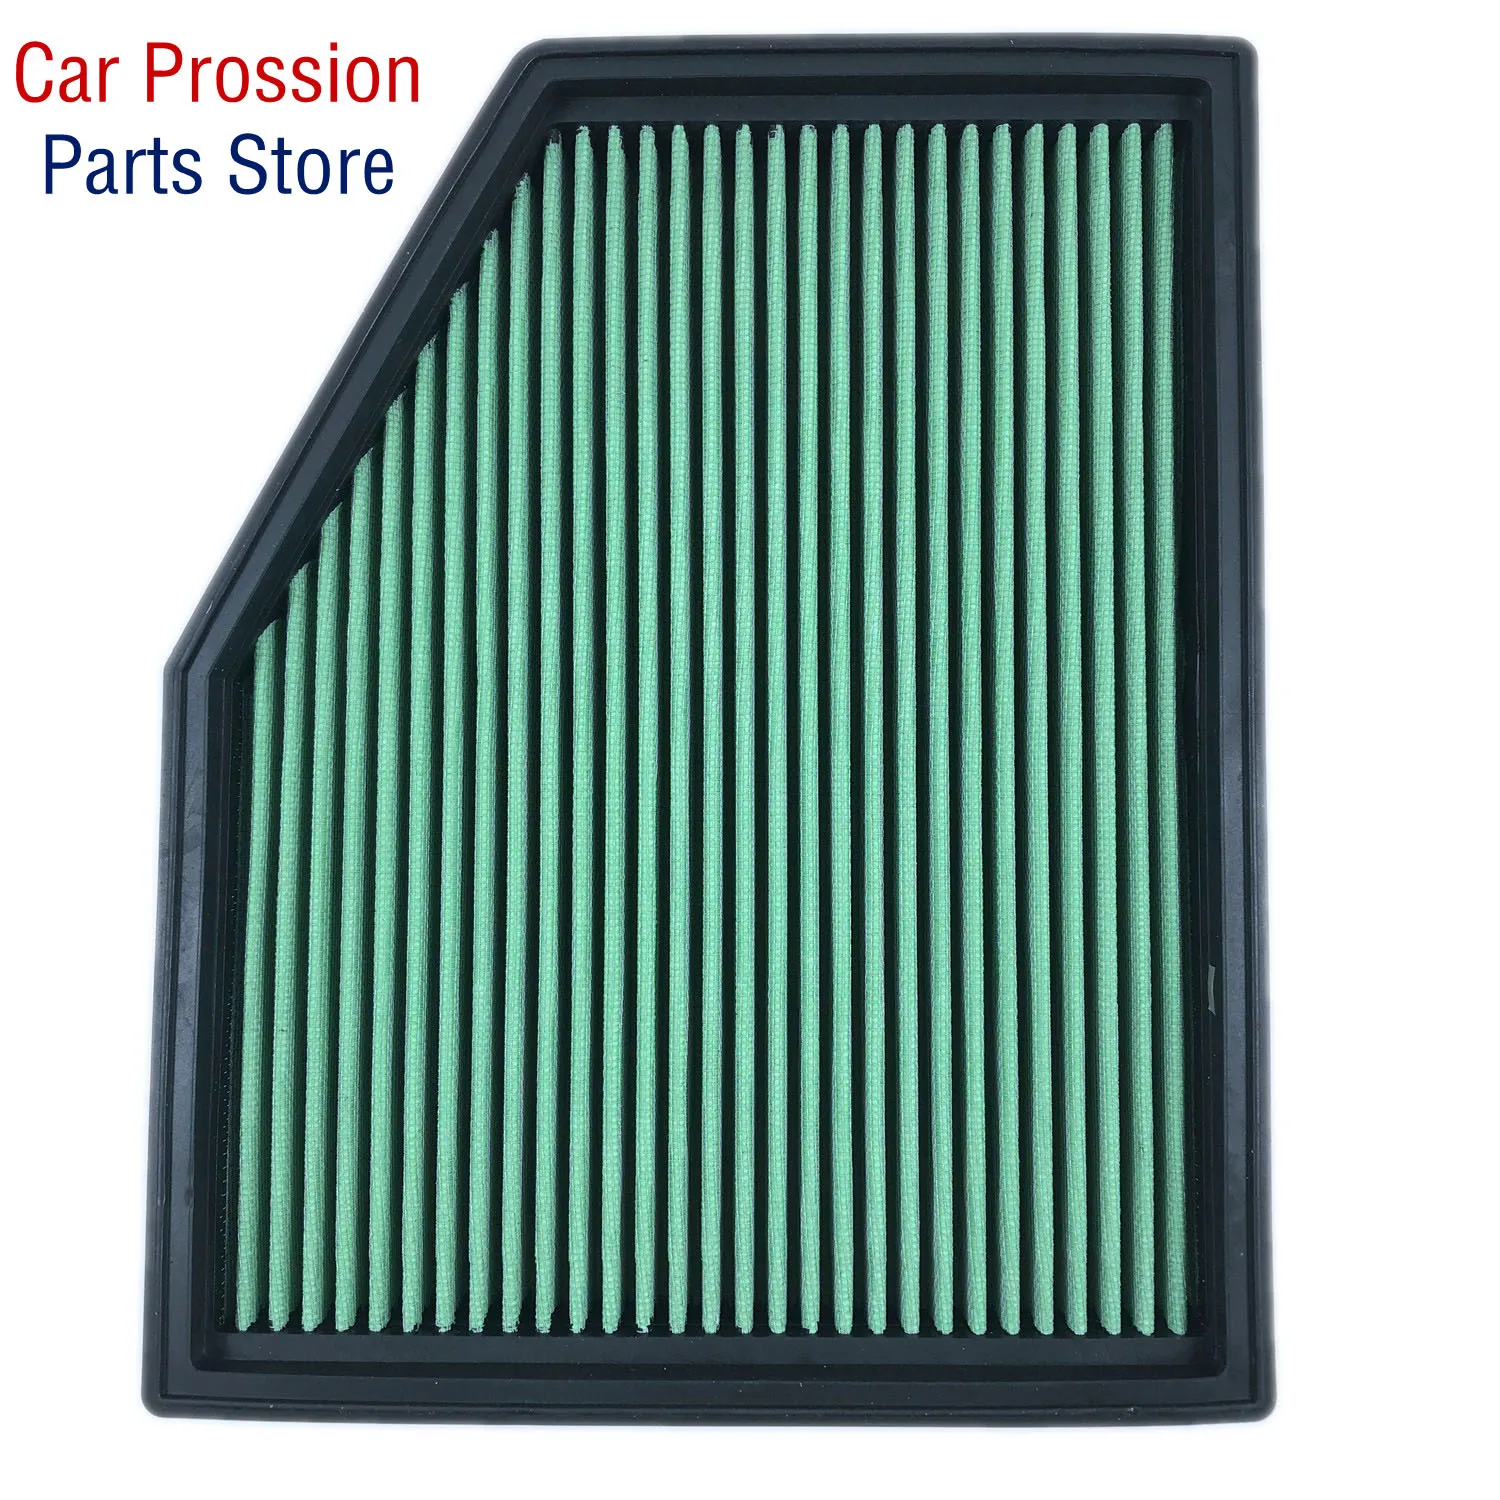 Air Filter Fits for BMW E60 E61 520i 523i 525i 525xi 528i 530i 630i Z4 Cold Air Intake Washable Replacement  High Flow